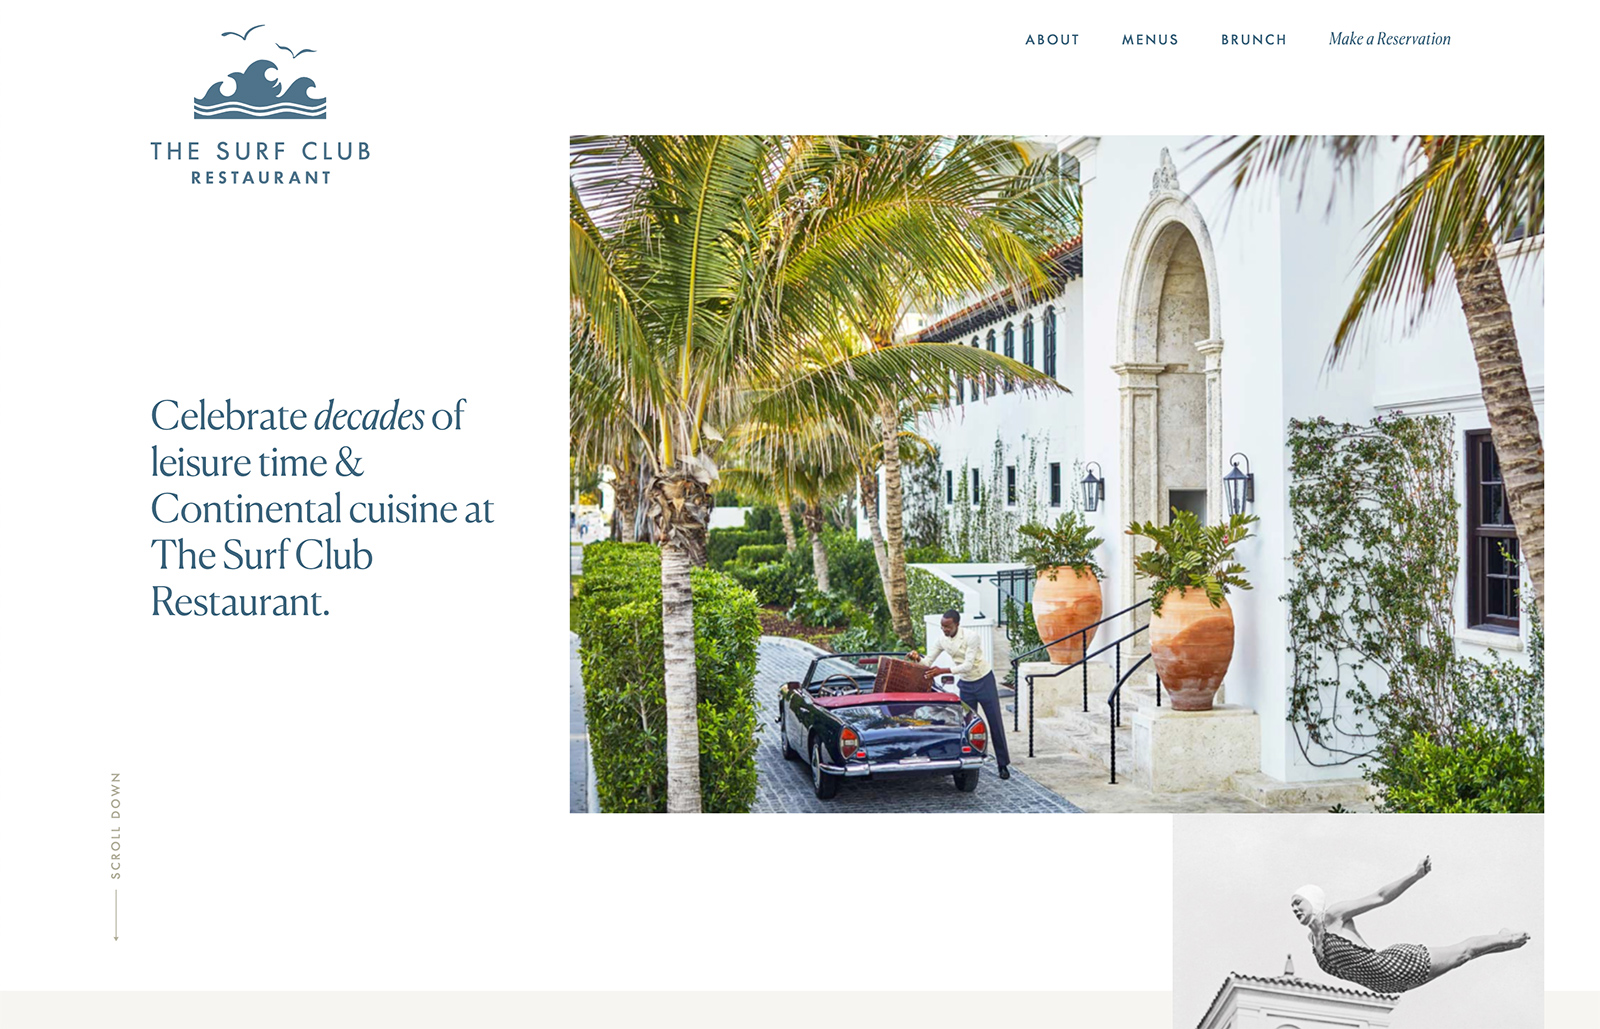 Thomas Keller Surf Club Celebrate decades of leisure time & Continental cuisine at The Surf Club Restaurant.